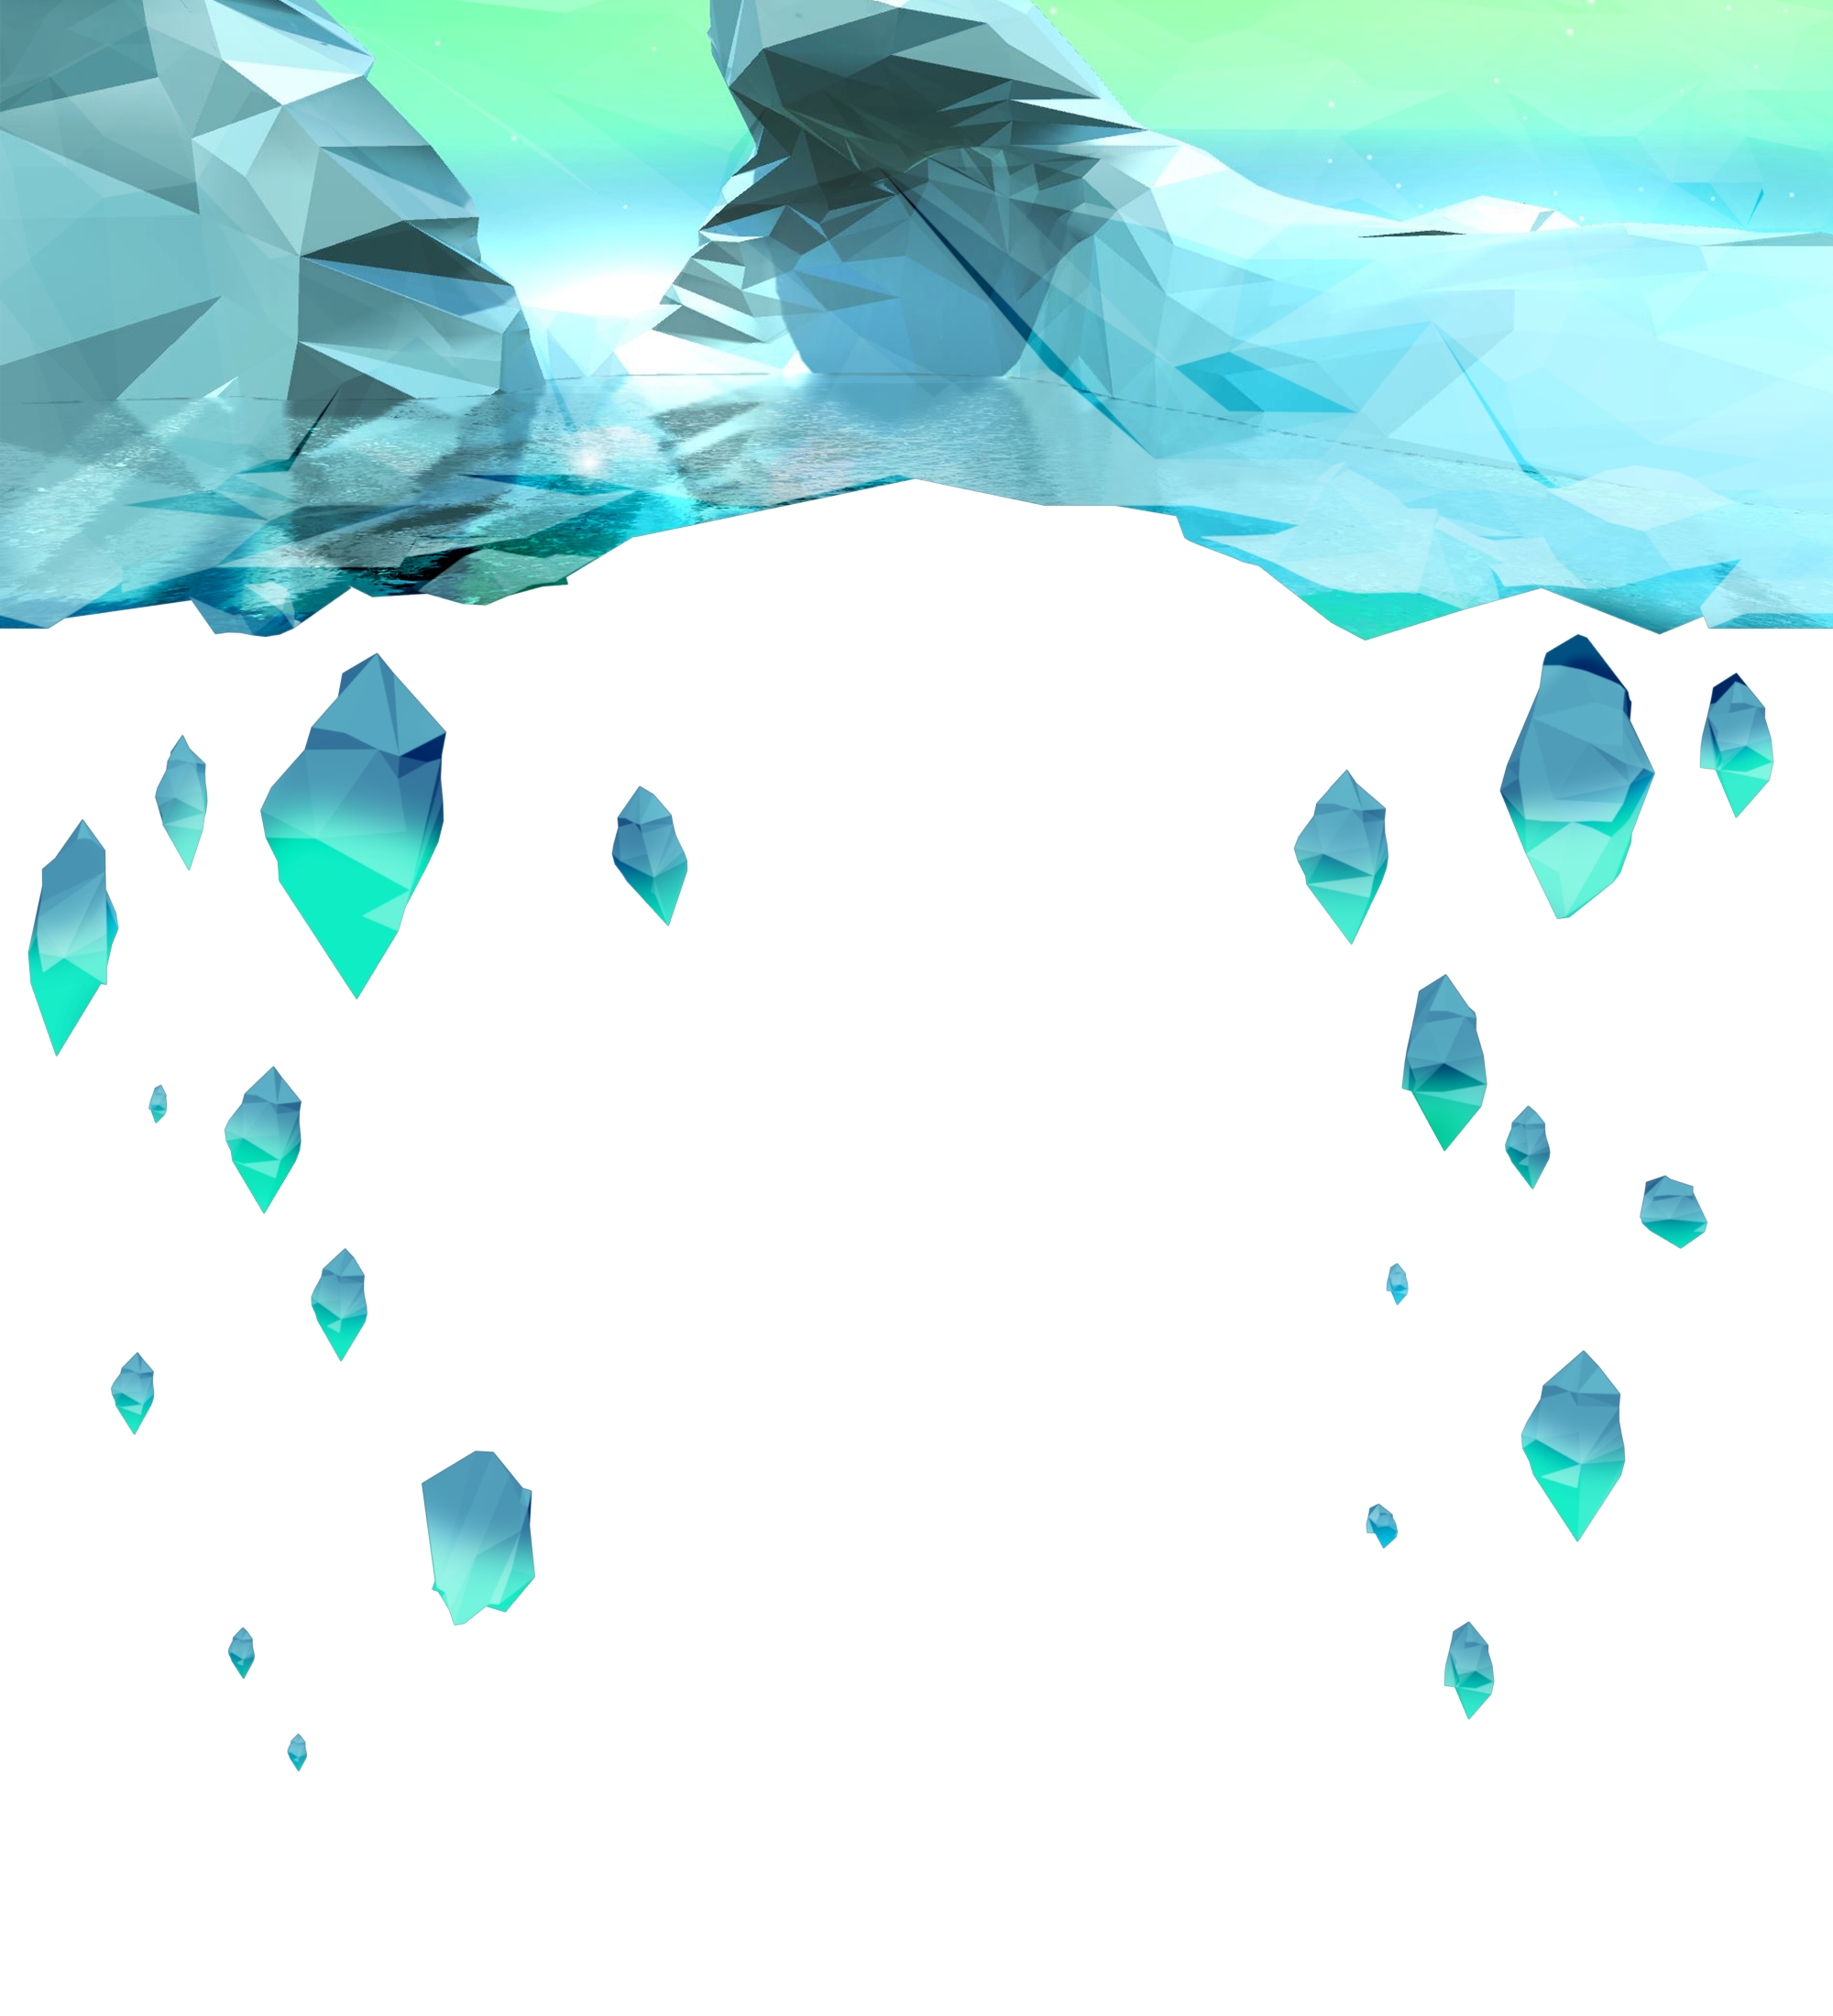 A low-poly 3D model of a frozen glacier in water, overlayed into a crumbling header image